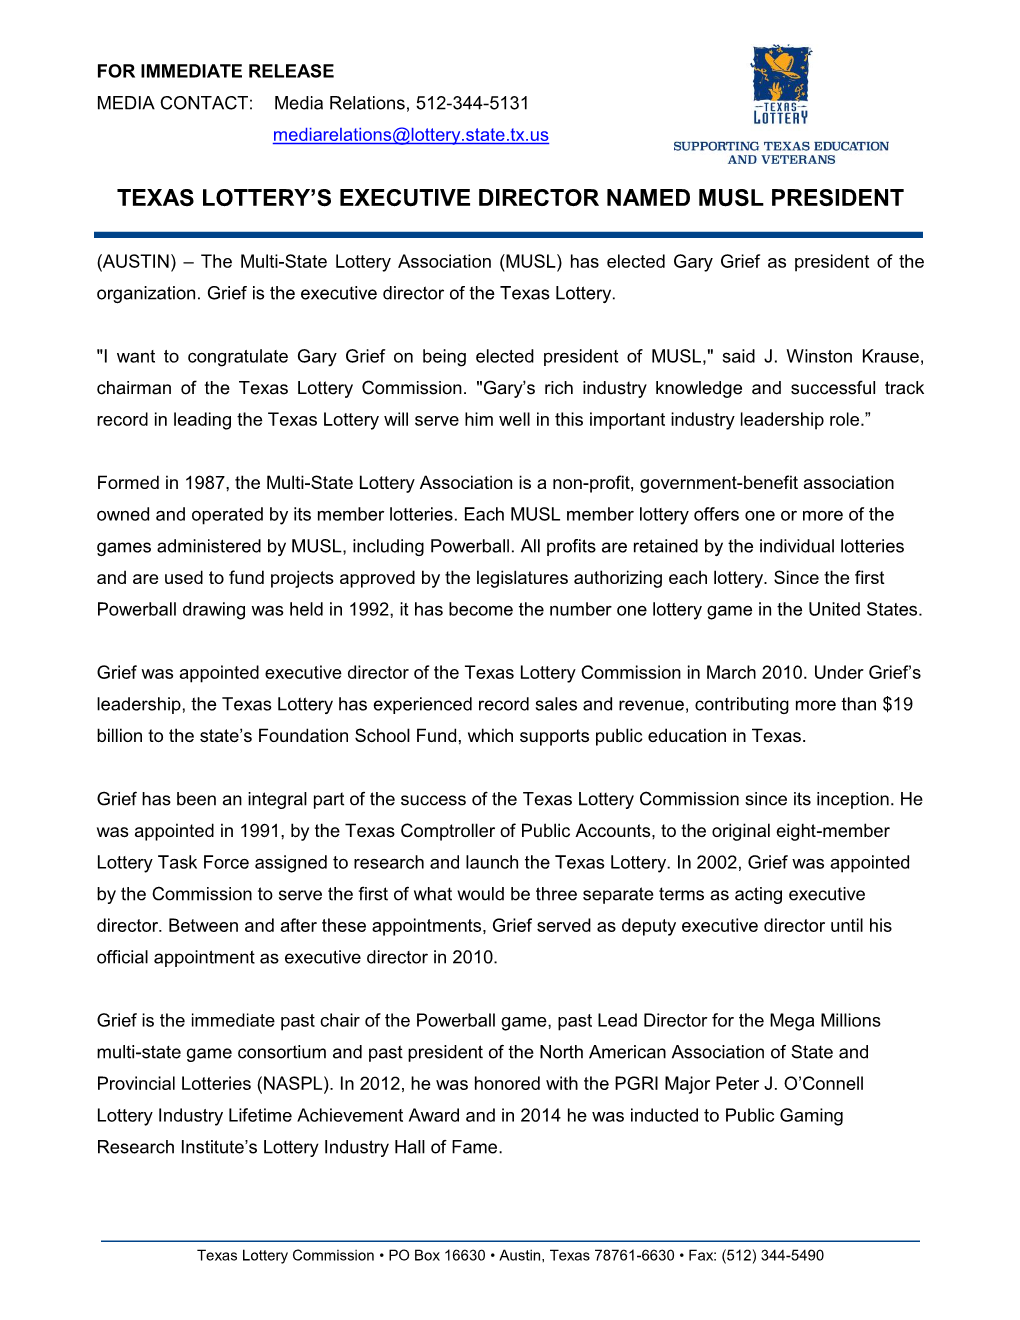 Texas Lottery's Executive Director Named Musl